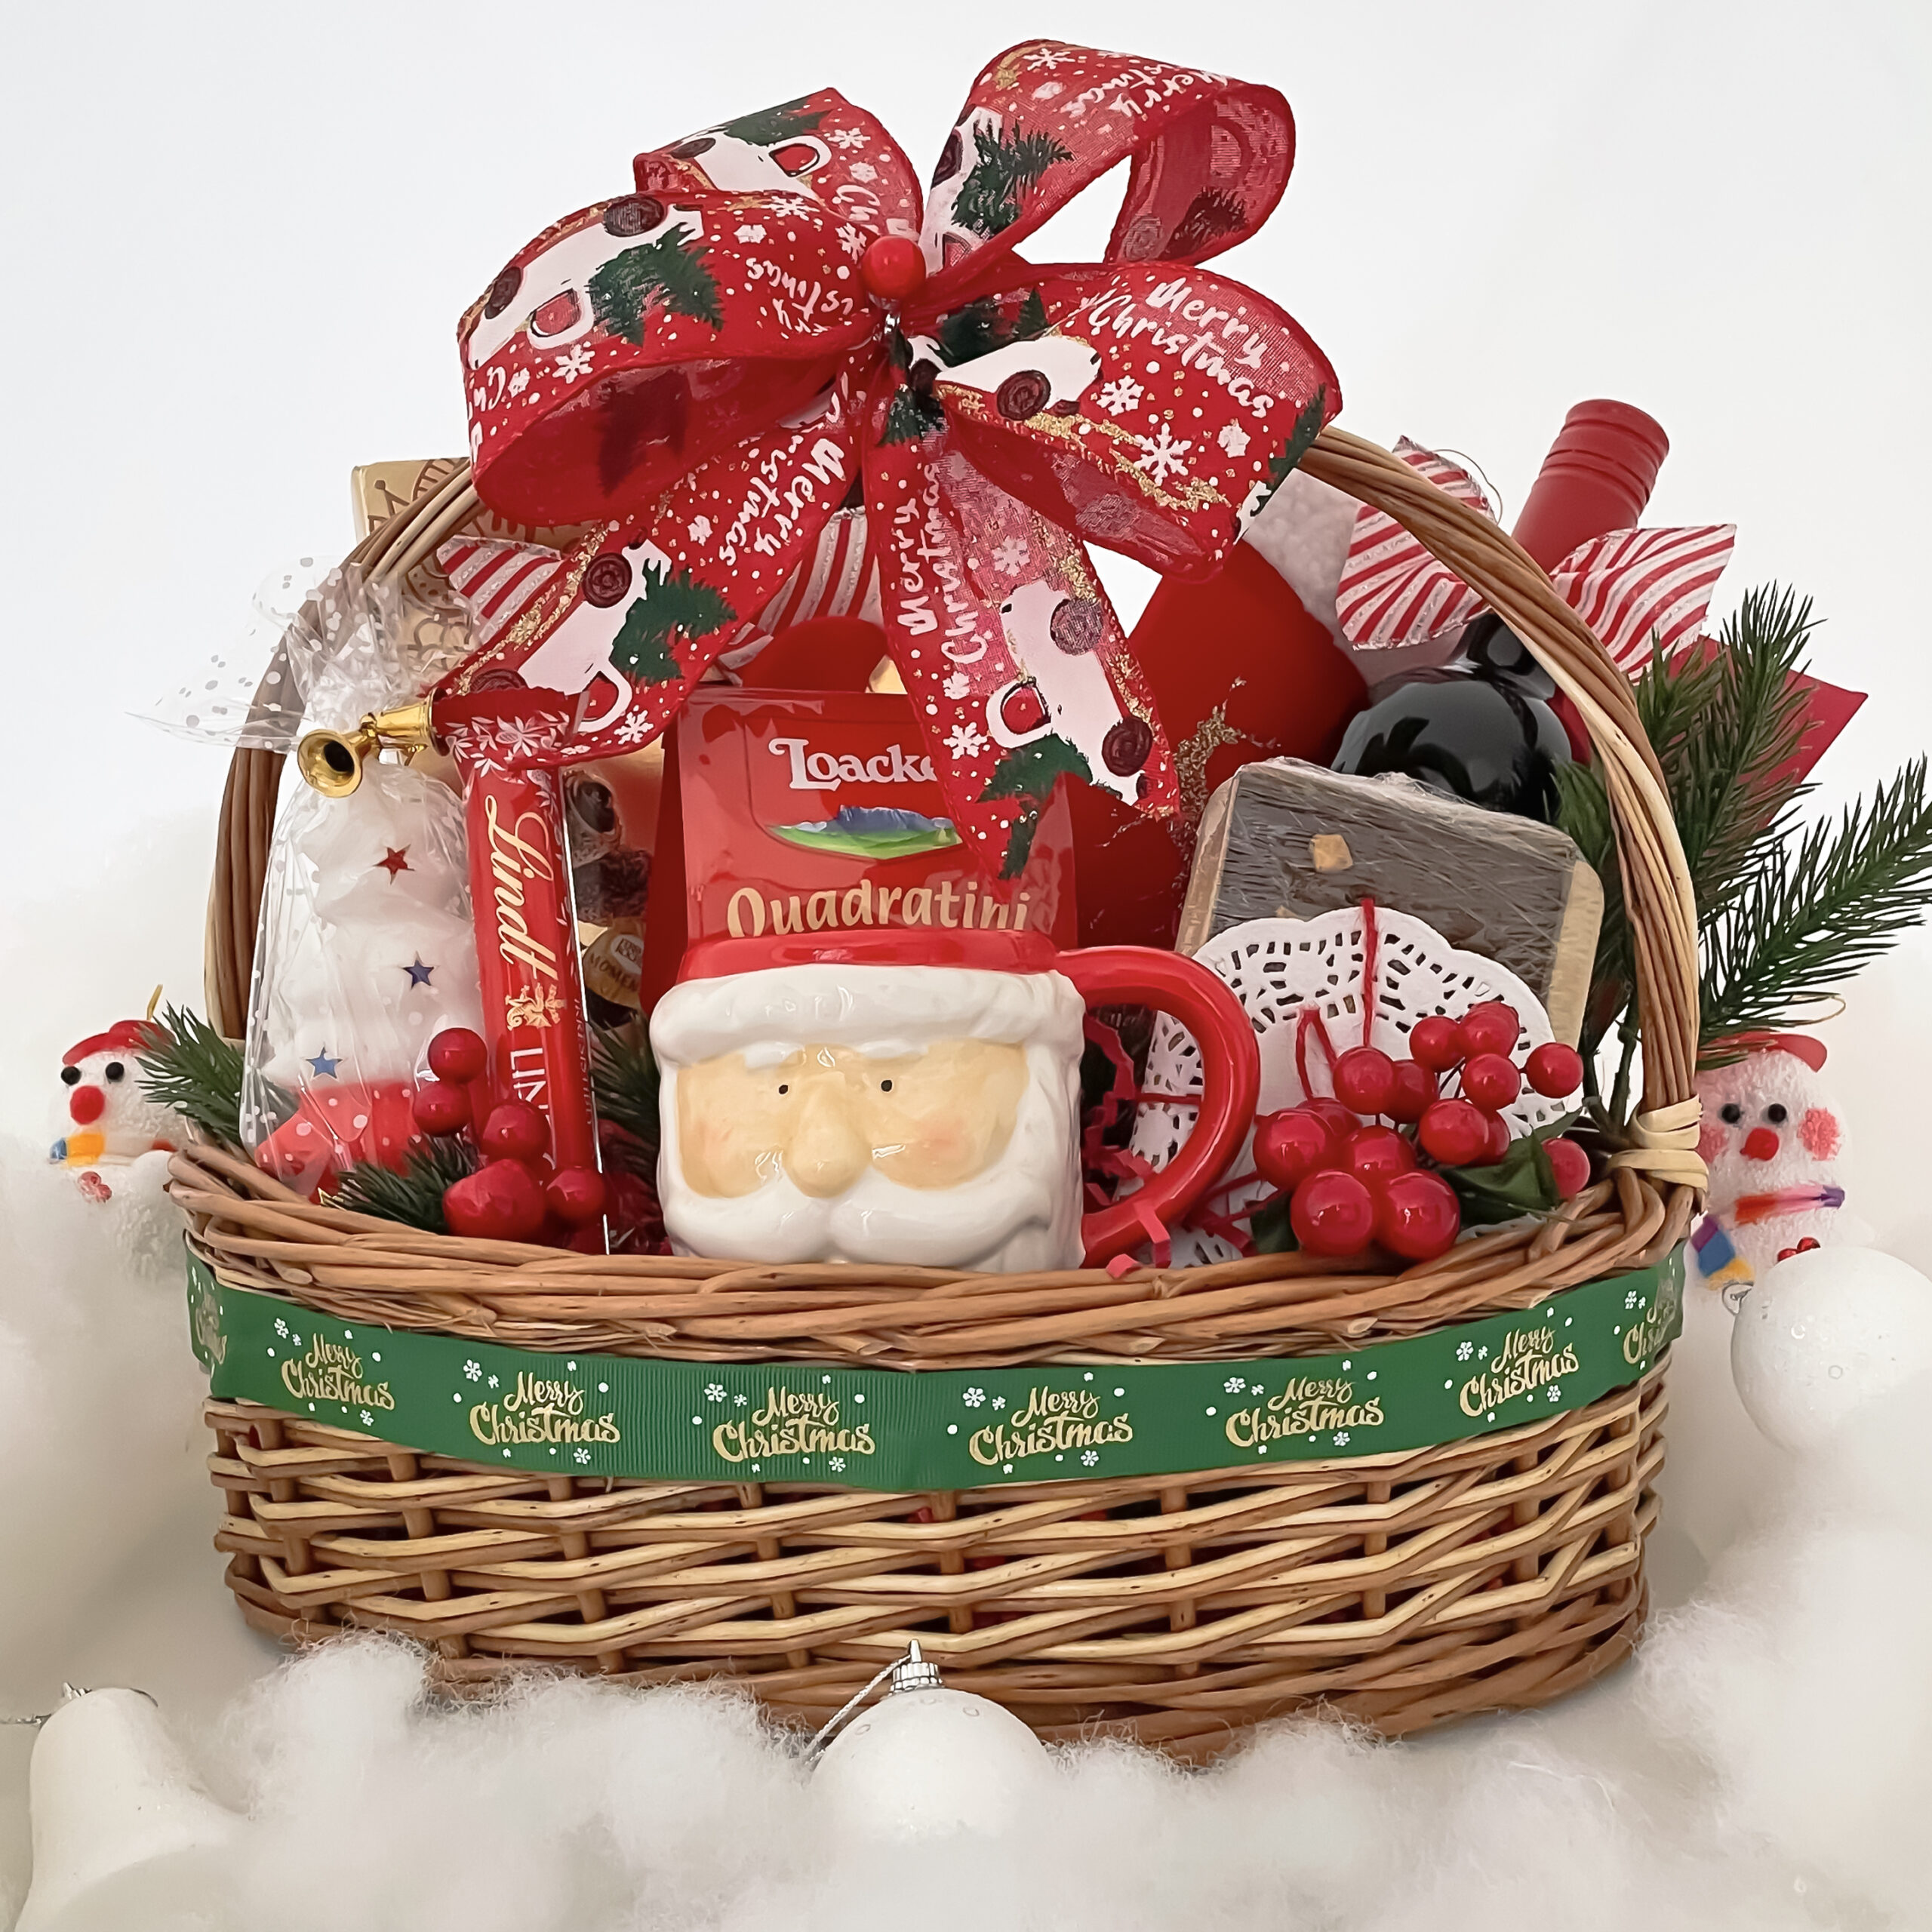 The Gourmet Choice Gift Basket by Wine Country Gift Baskets | Gourmet gift  baskets, Wine country gifts, Wine country gift baskets